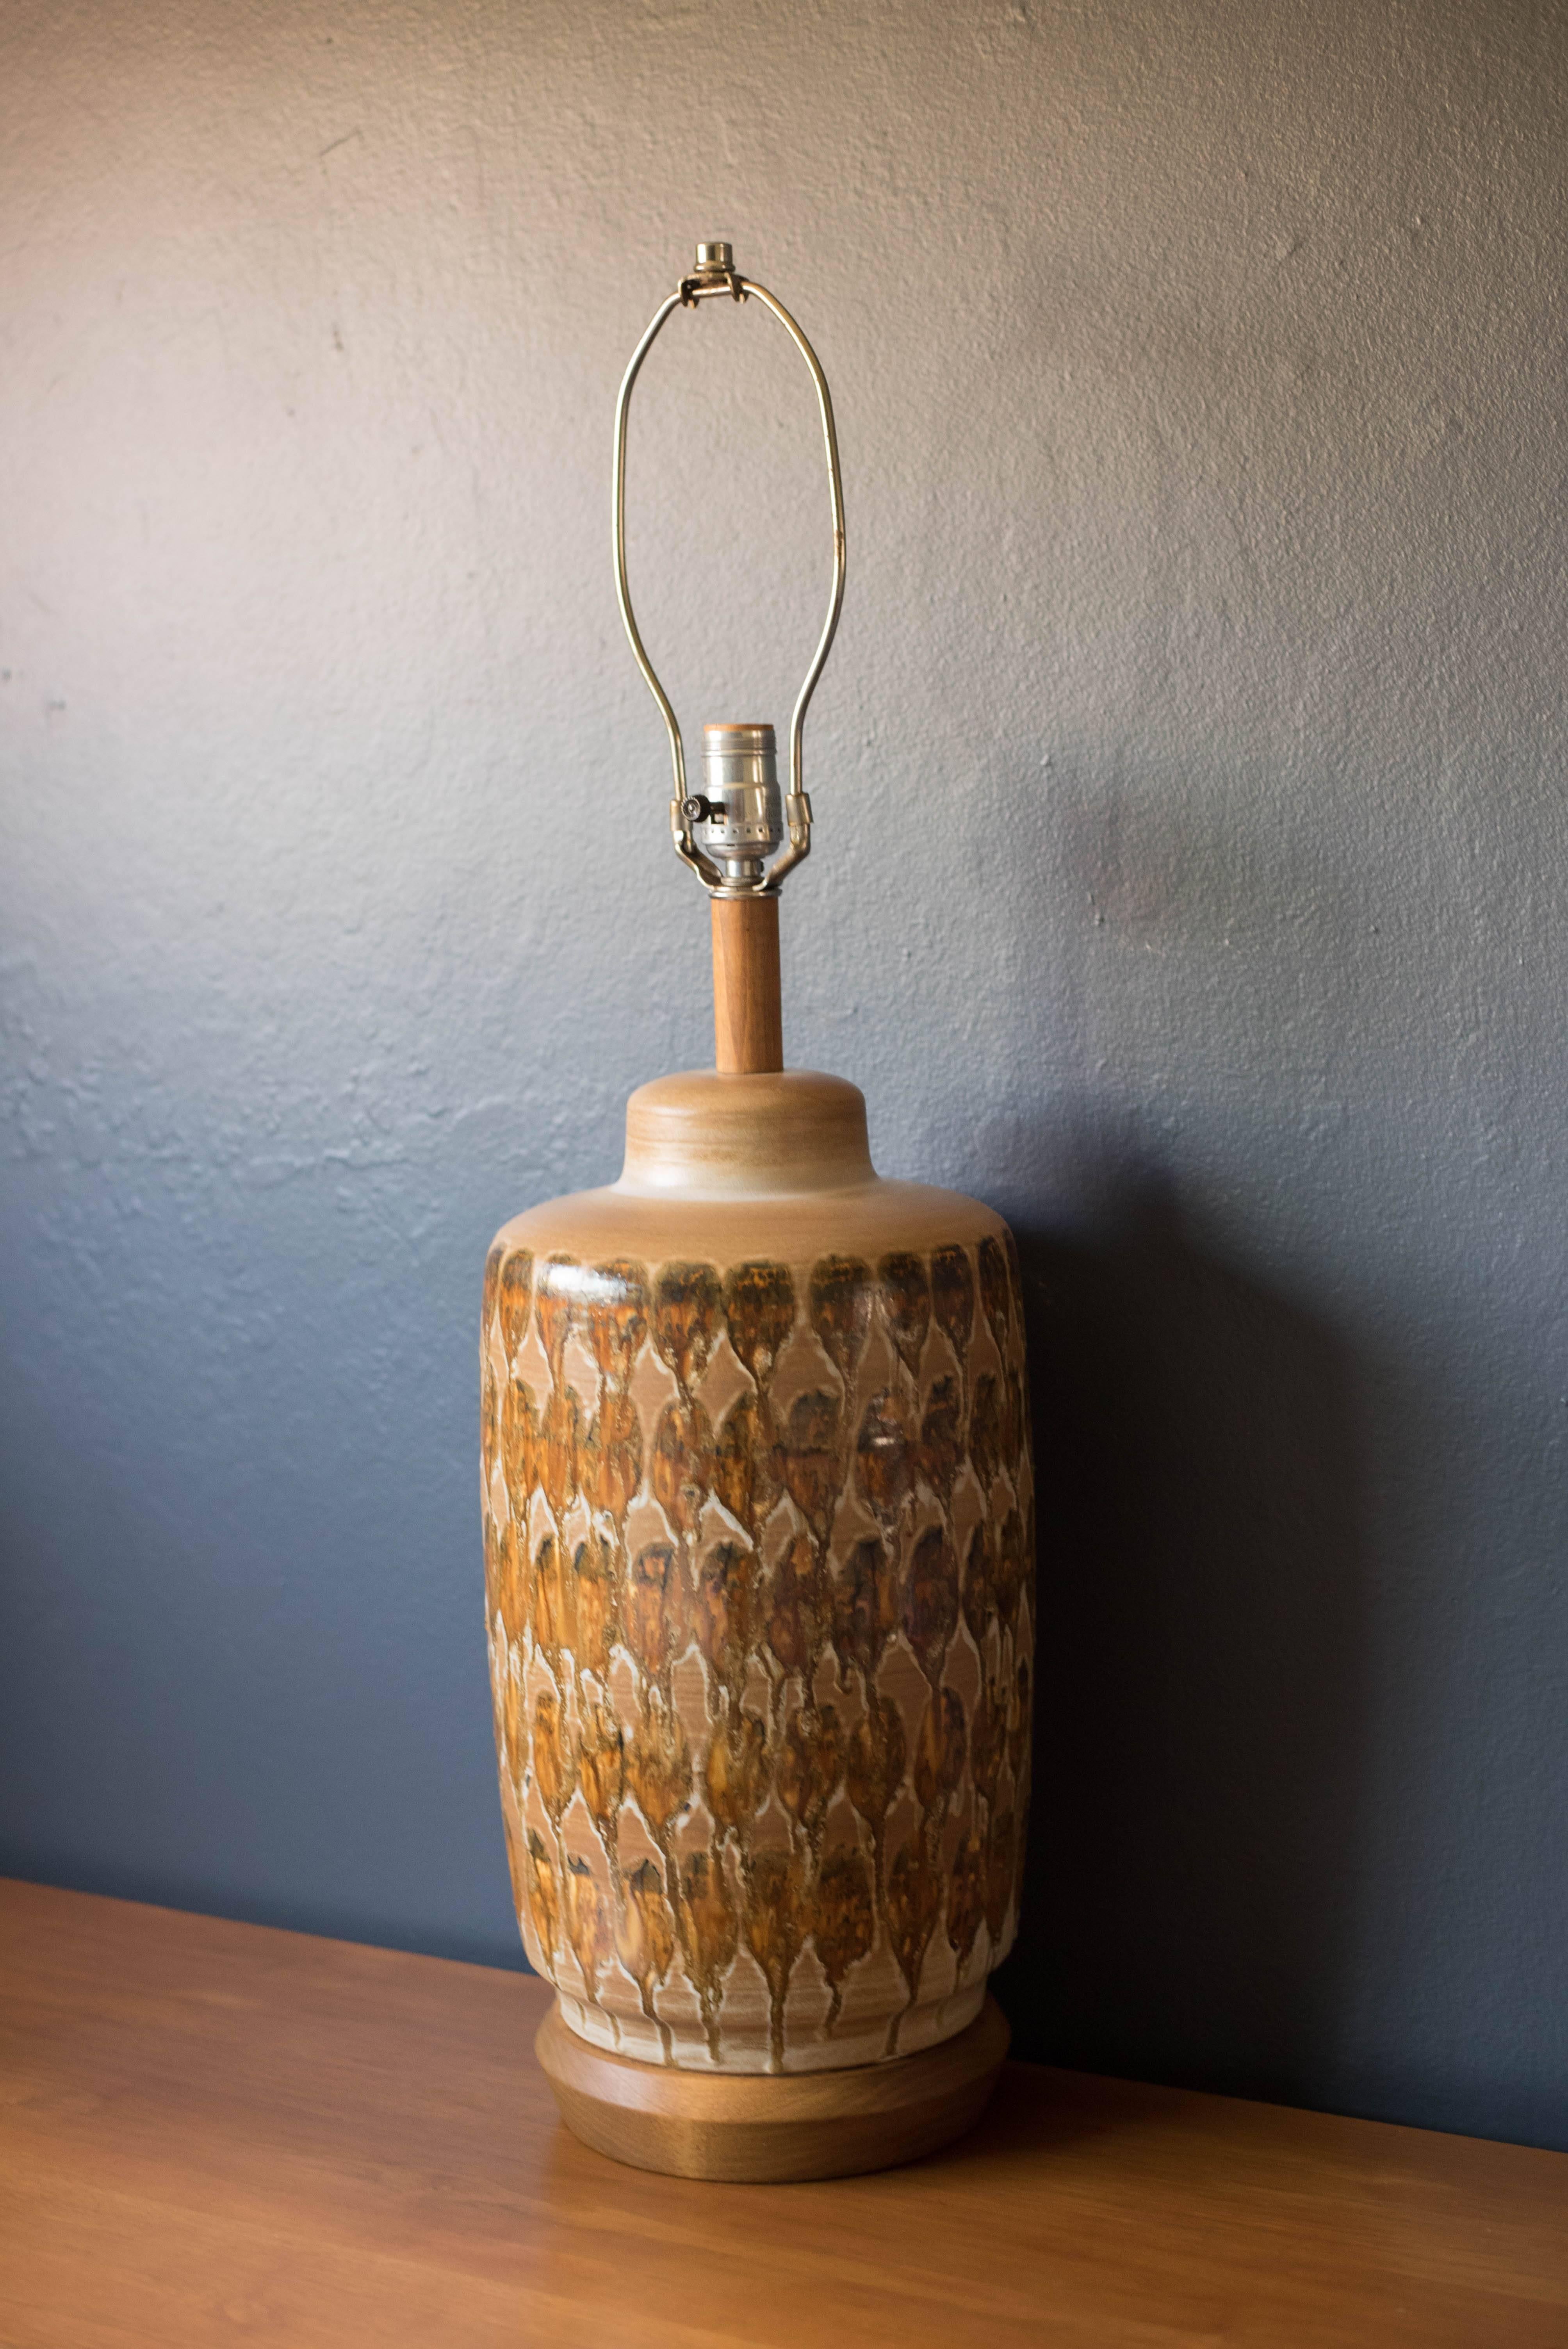 Mid-century ceramic pottery lamp, circa 1960s. This piece has a drip glazed finish in neutral tones. Features a three way switch and walnut stem and base.
 